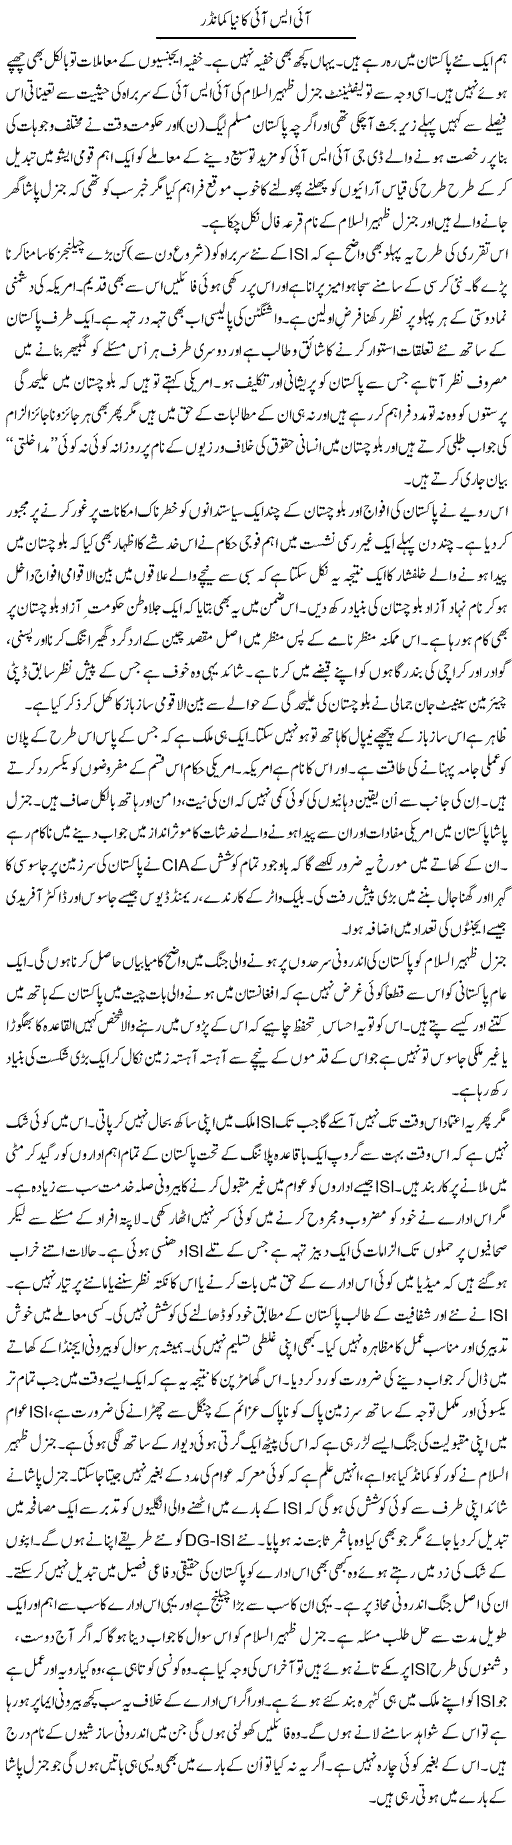 New ISI Chief Express Column Talat Hussain 13 March 2012